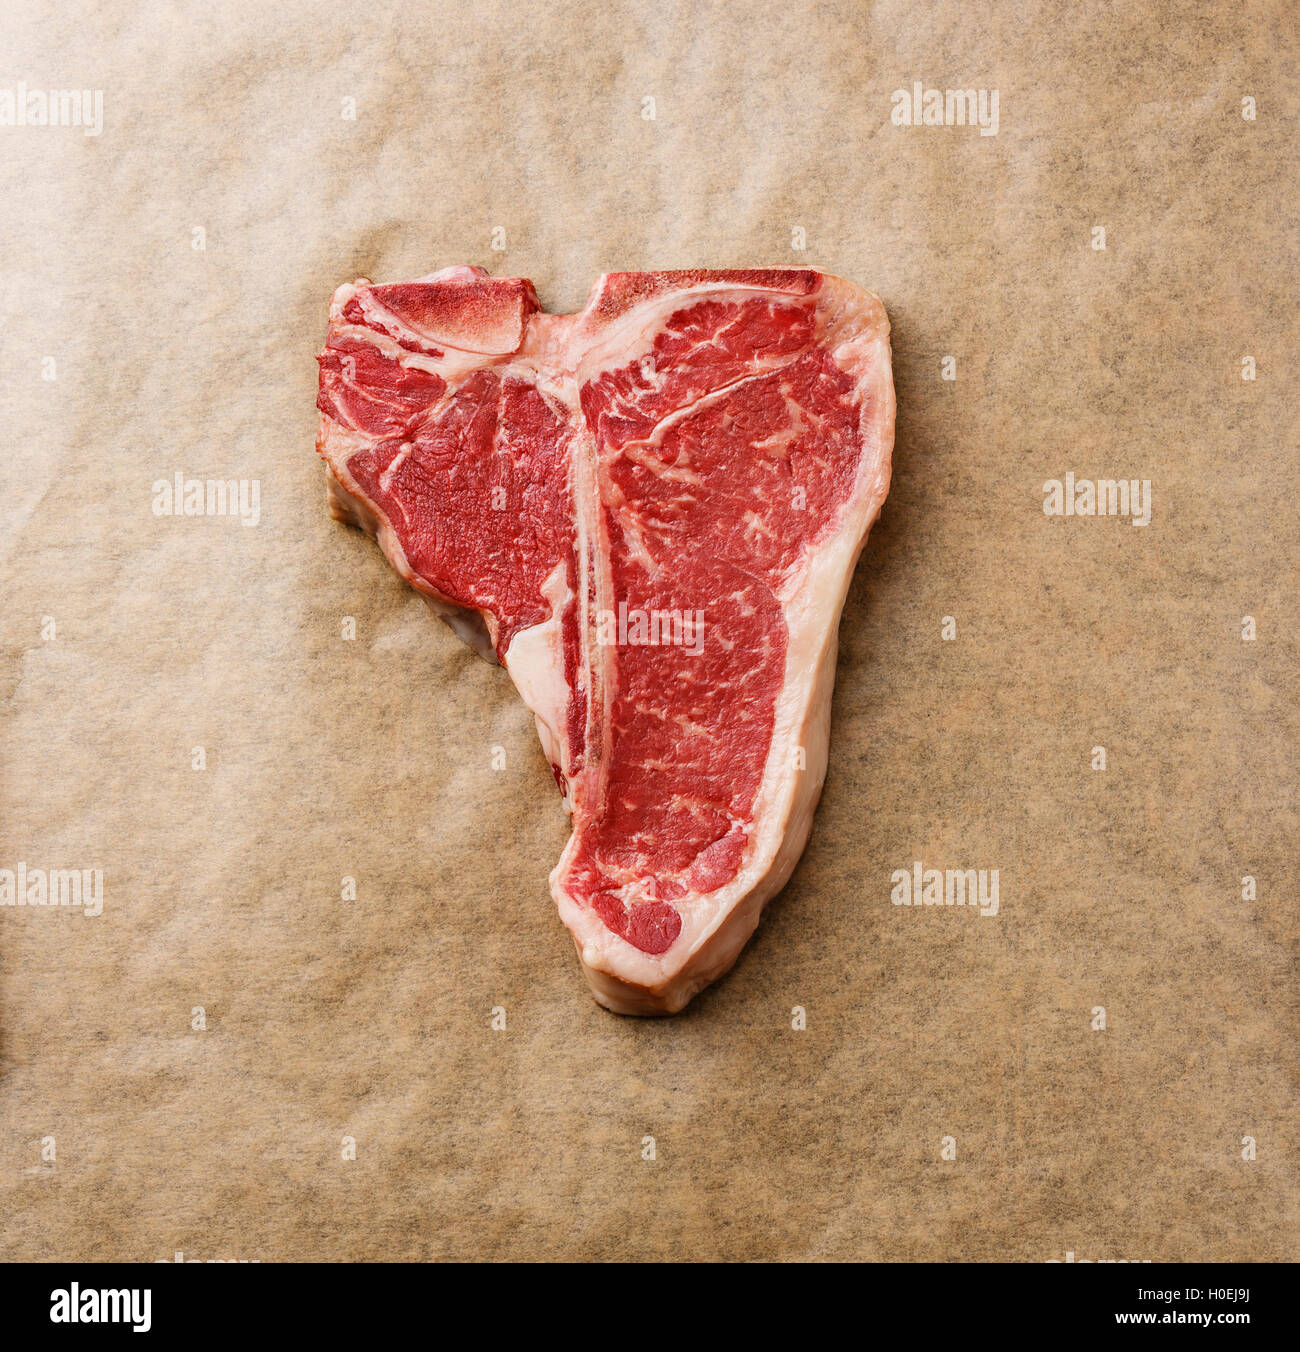 Raw fresh meat T-bone steak on cooking paper background Stock Photo